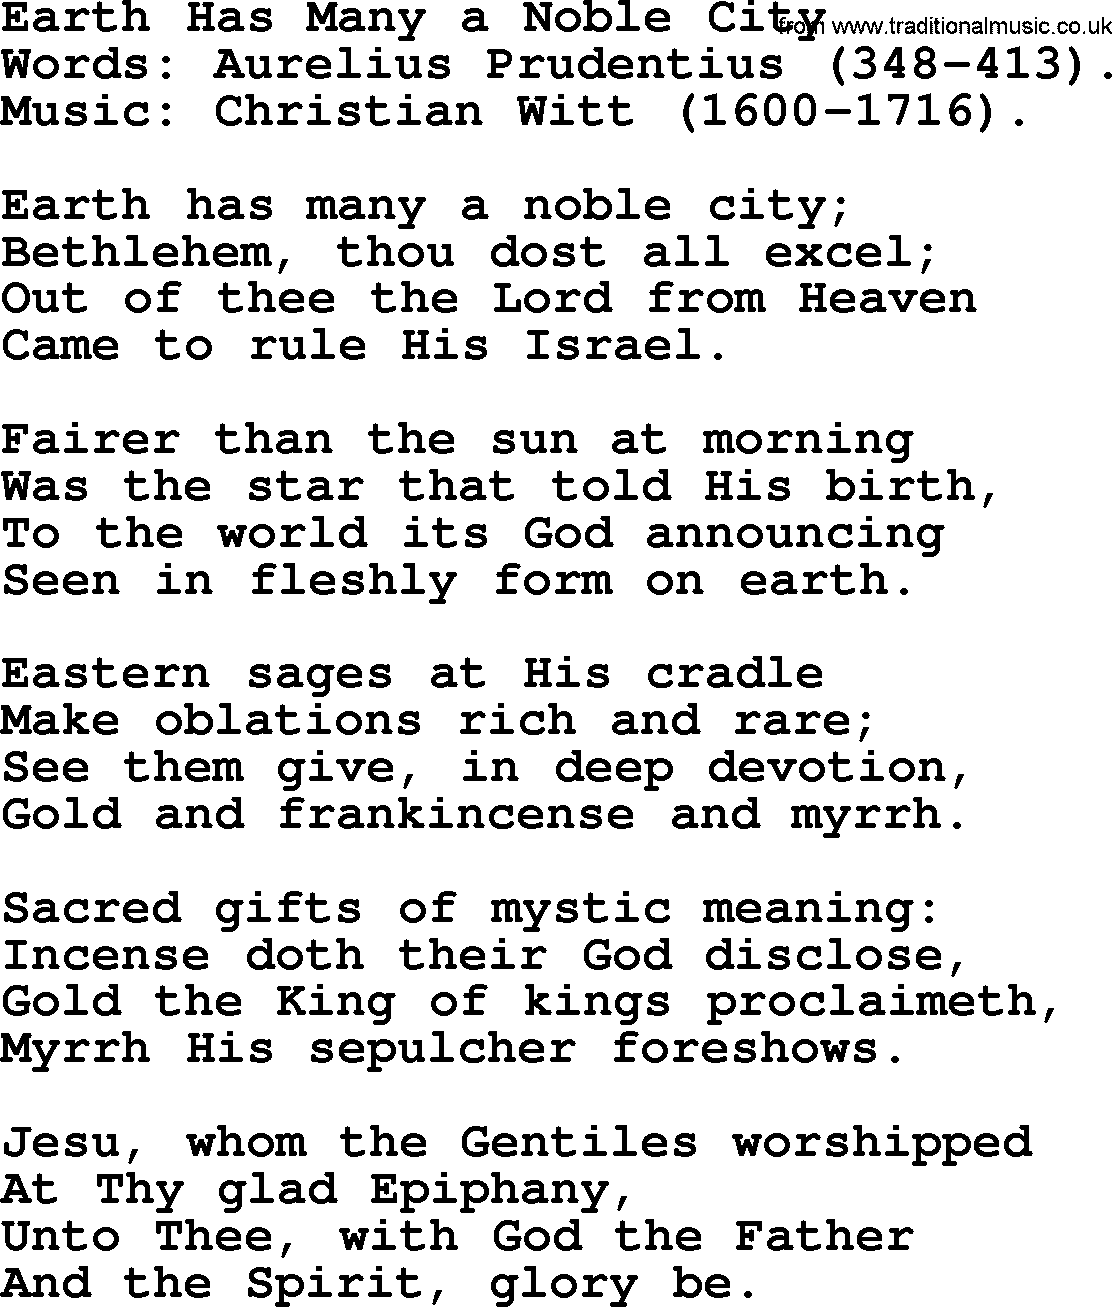 Christmas Hymns, Carols and Songs, title: Earth Has Many A Noble City, lyrics with PDF